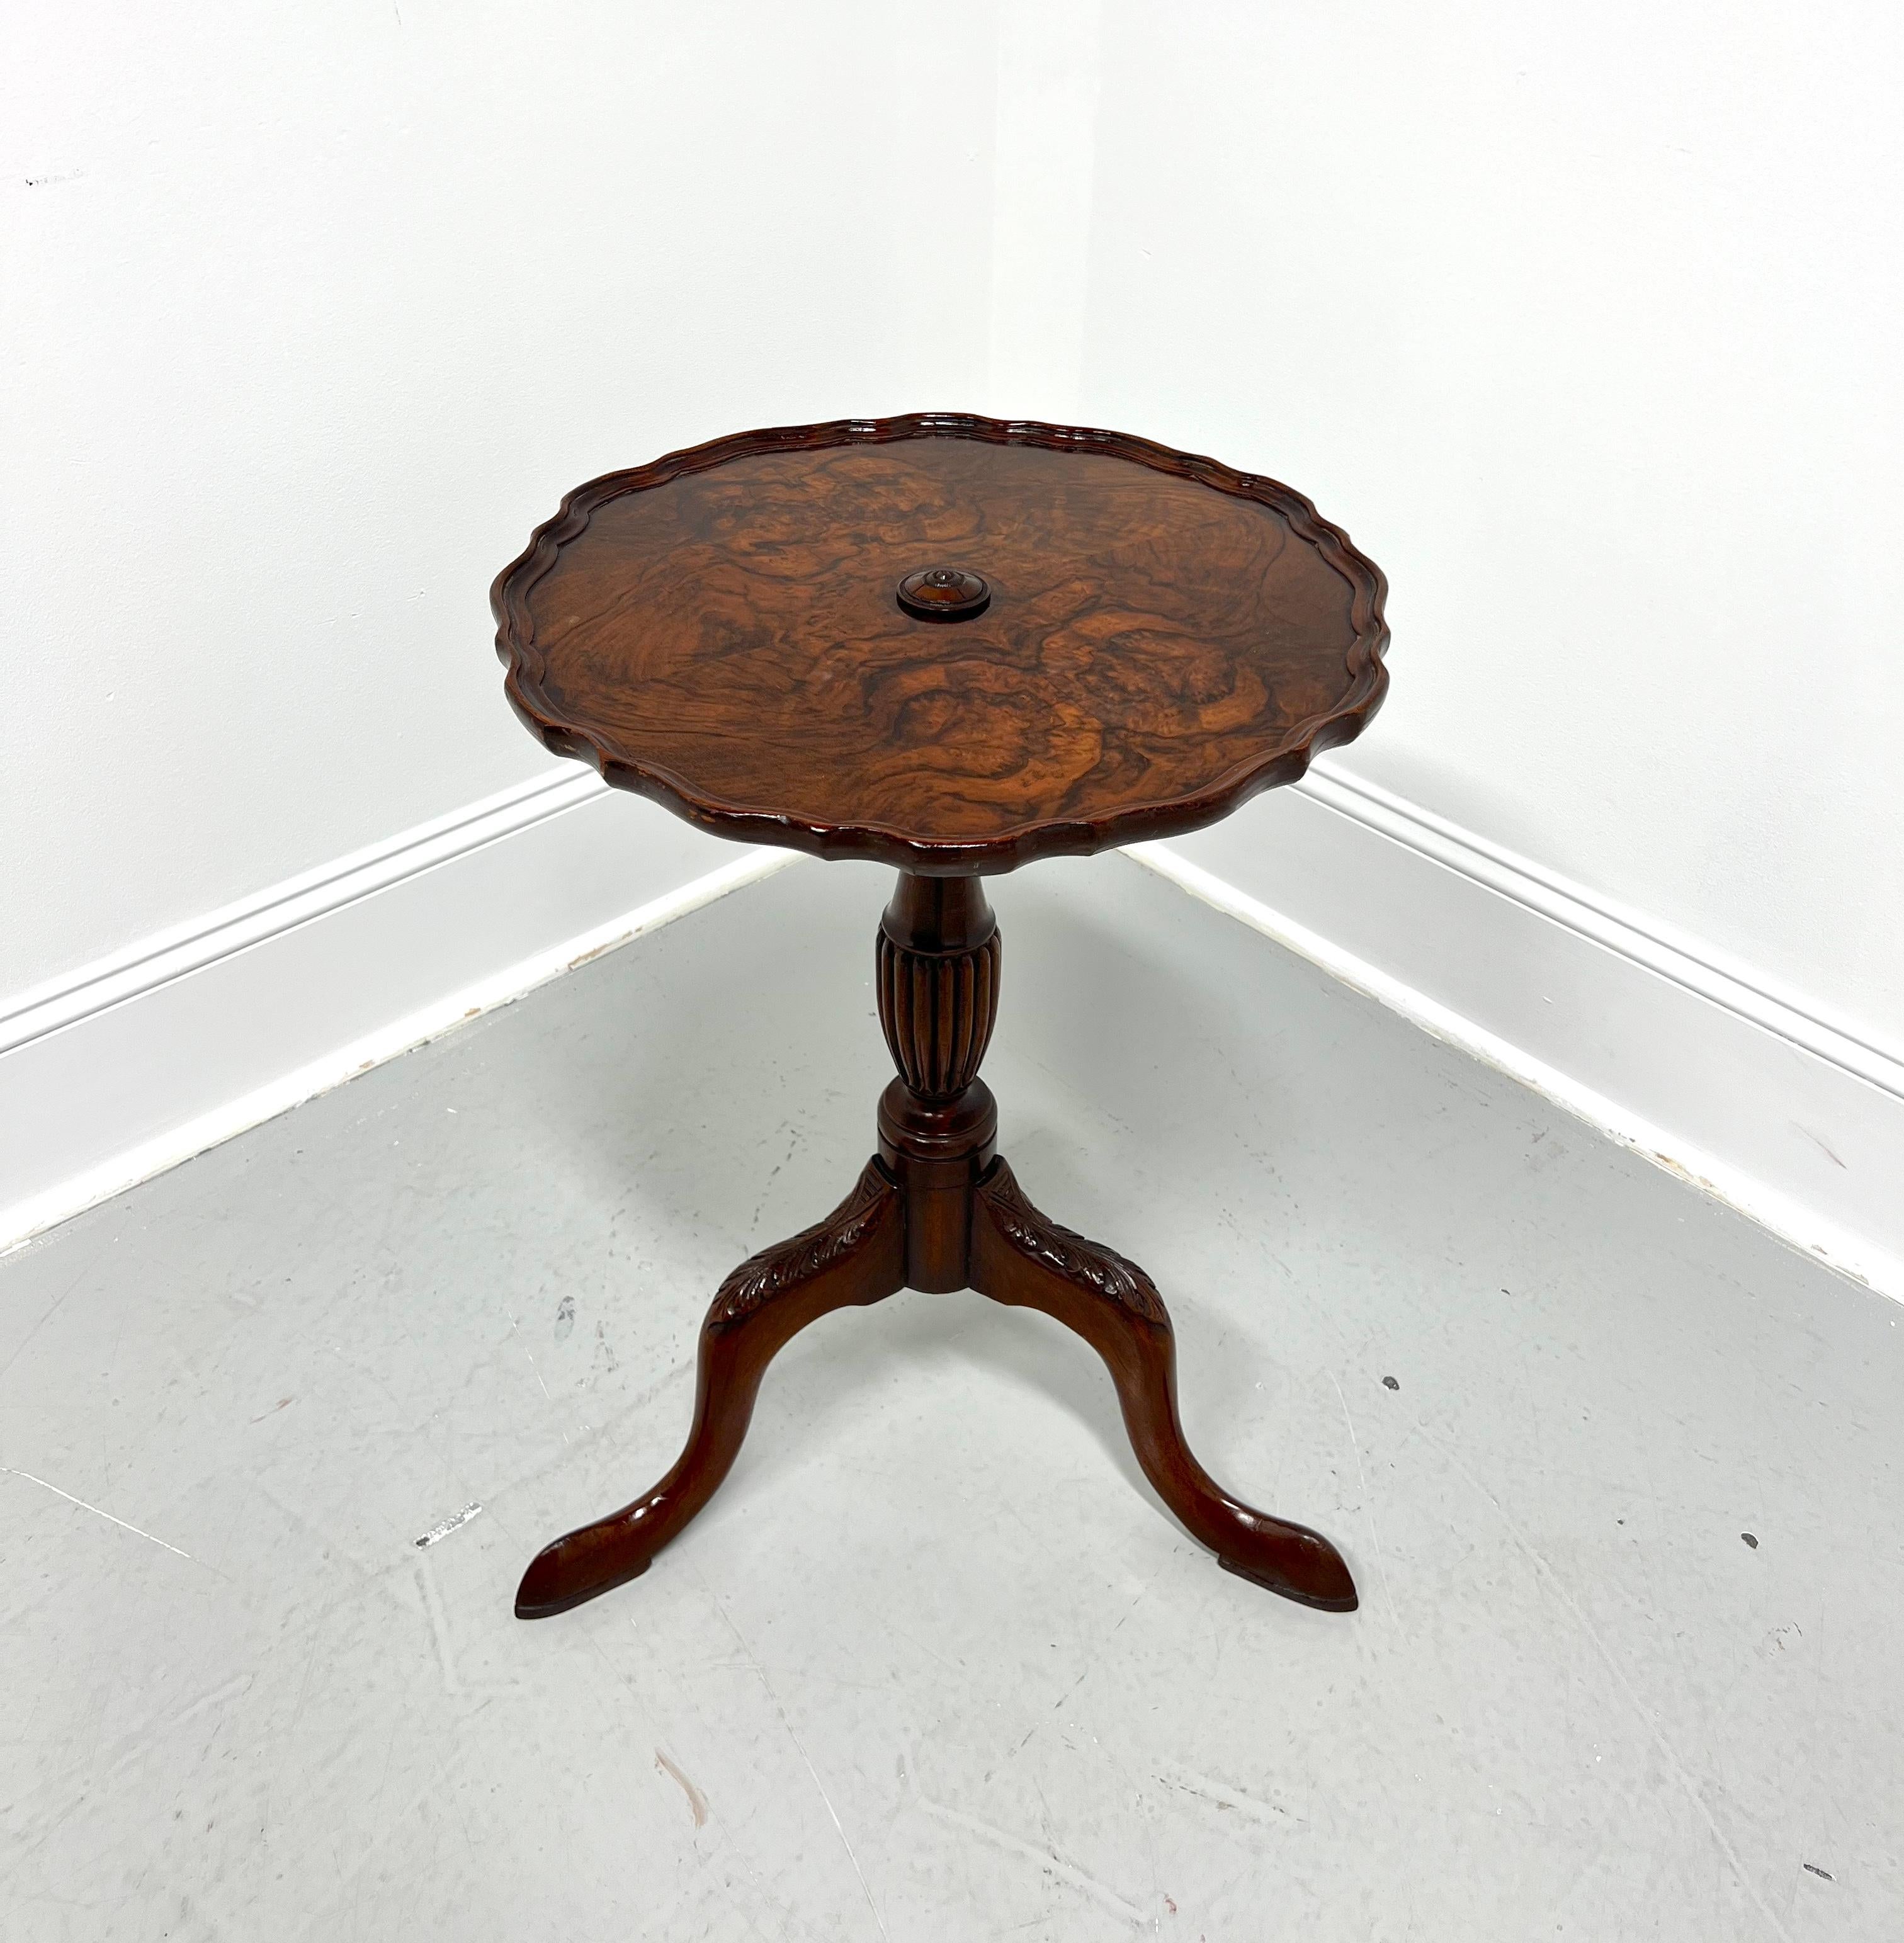 Antique Early 20th Century Mahogany & Burl Walnut Petite Pie Crust Table For Sale 3